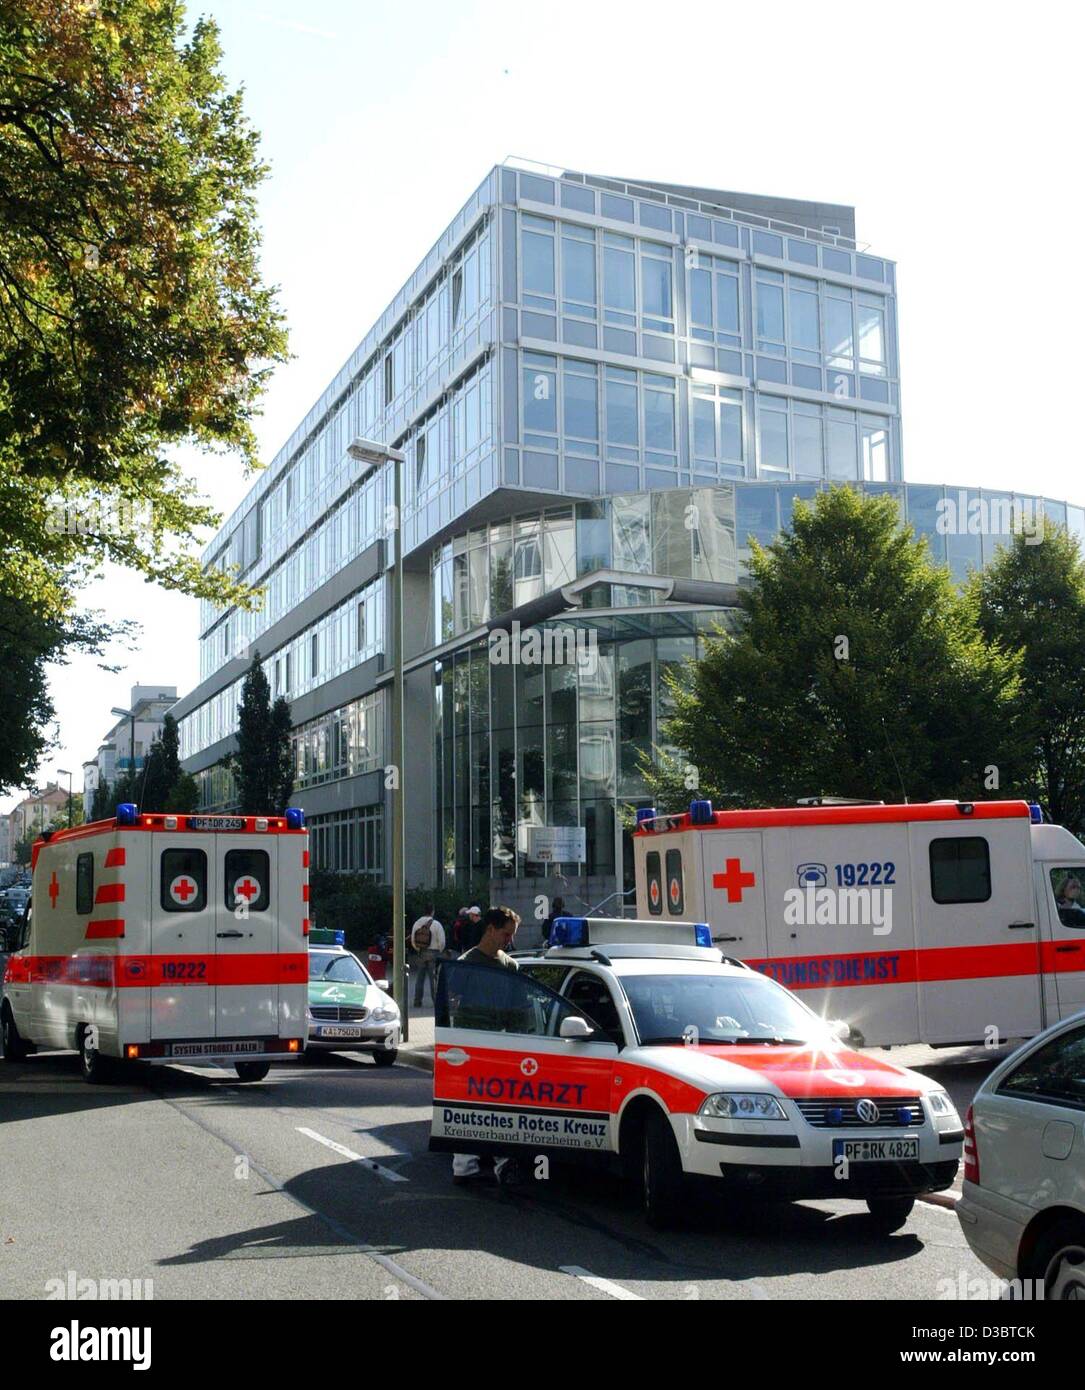 (dpa) - Several ambulance cars are parked outside a mail-order company, where a 24-year-old man attacked coworkers with a samurai sword, in Pforzheim, Germany, 16 September 2003. He killed one women and seriously wounded three others before plunging the weapon into himself. The police spokesman in t Stock Photo